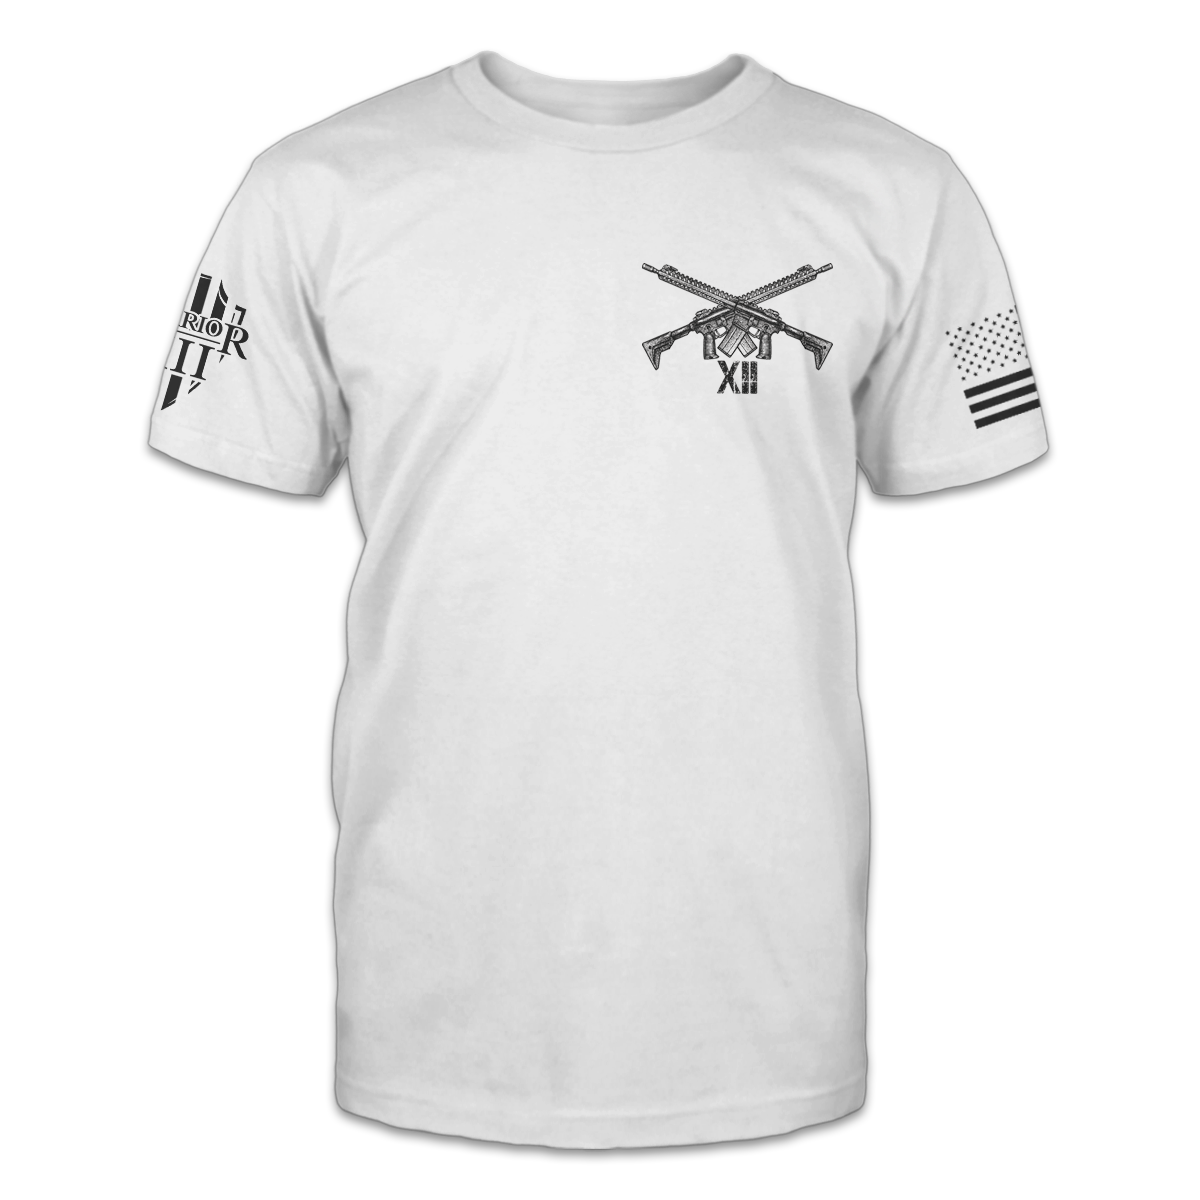 A white t-shirt with two guns crossed over printed on the front of the shirt.